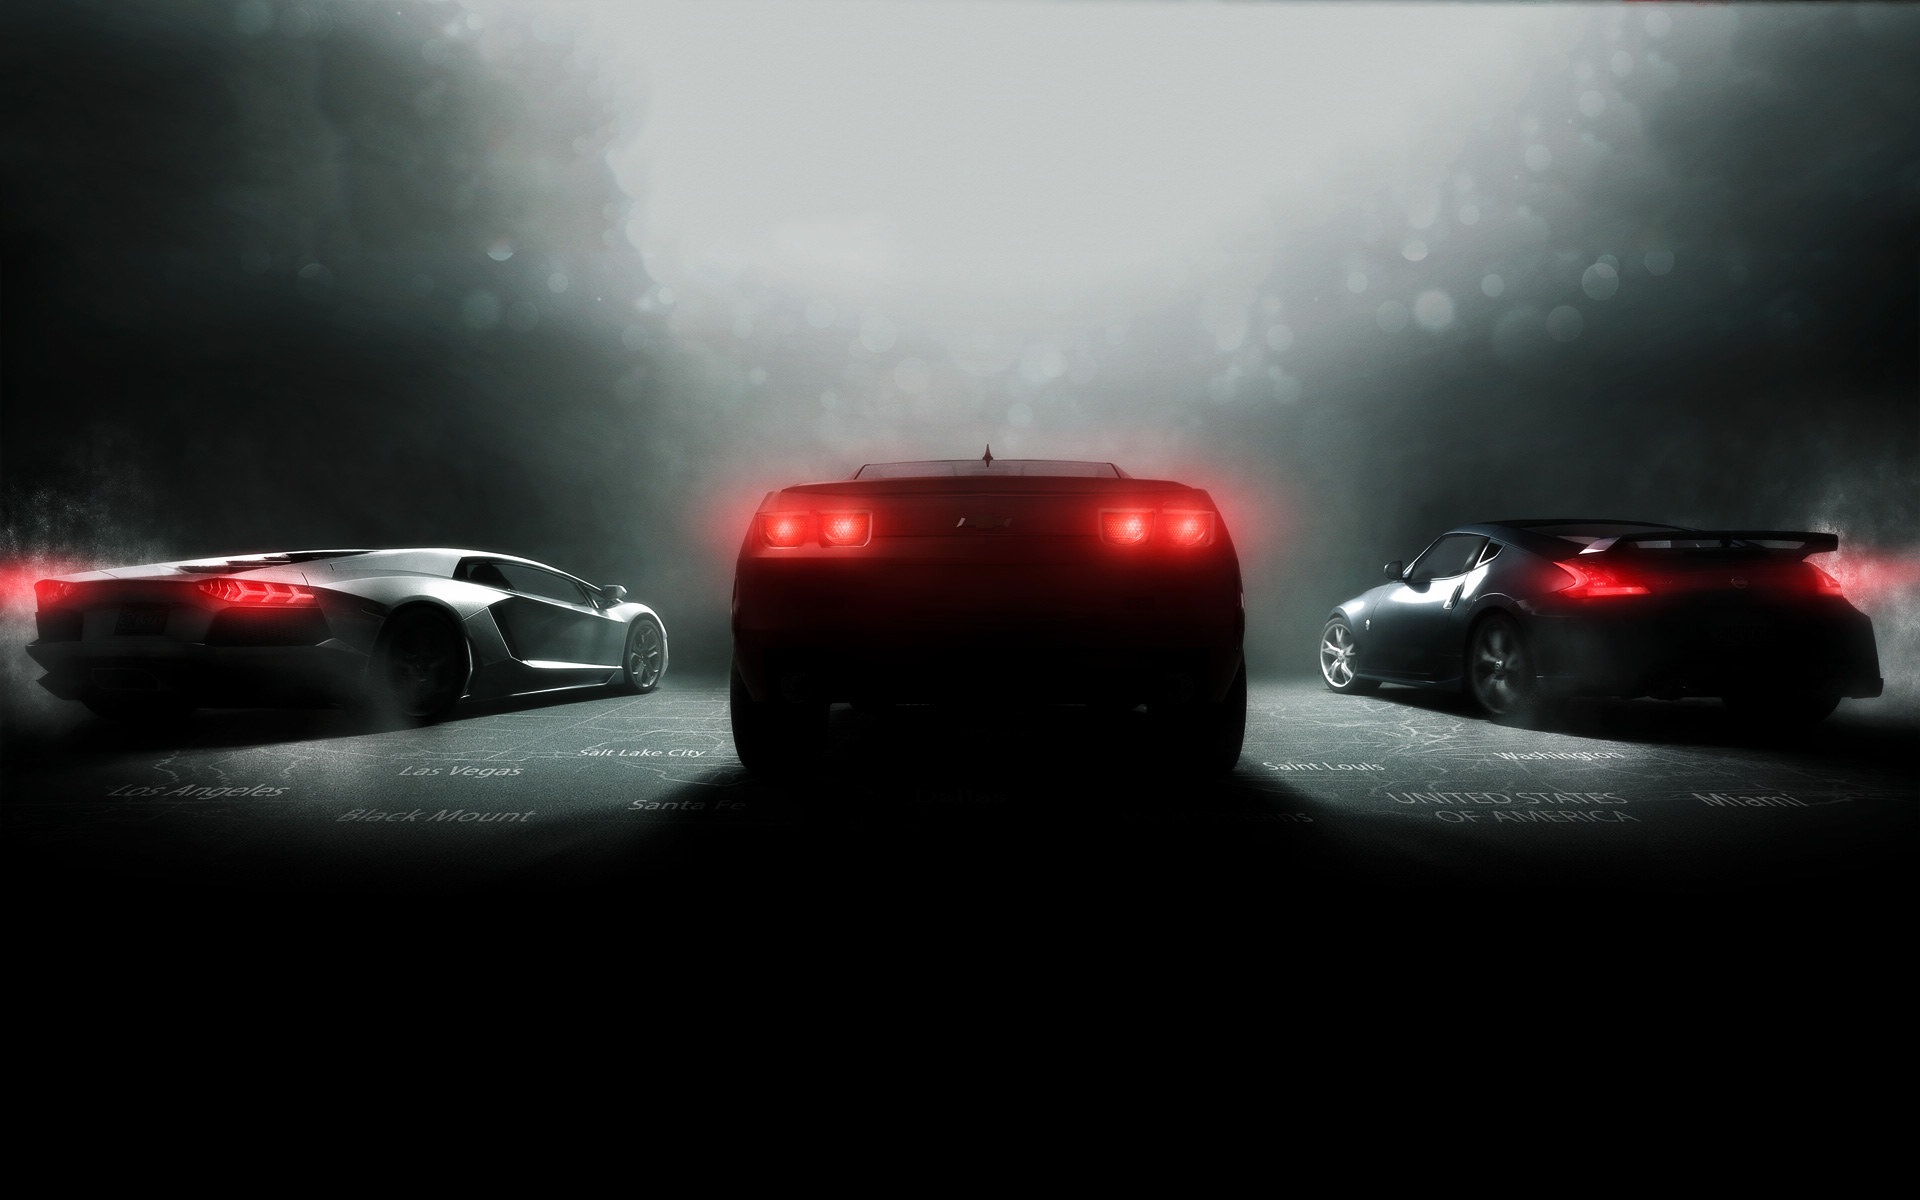 The Crew game HD wallpapers #3 - 1920x1200